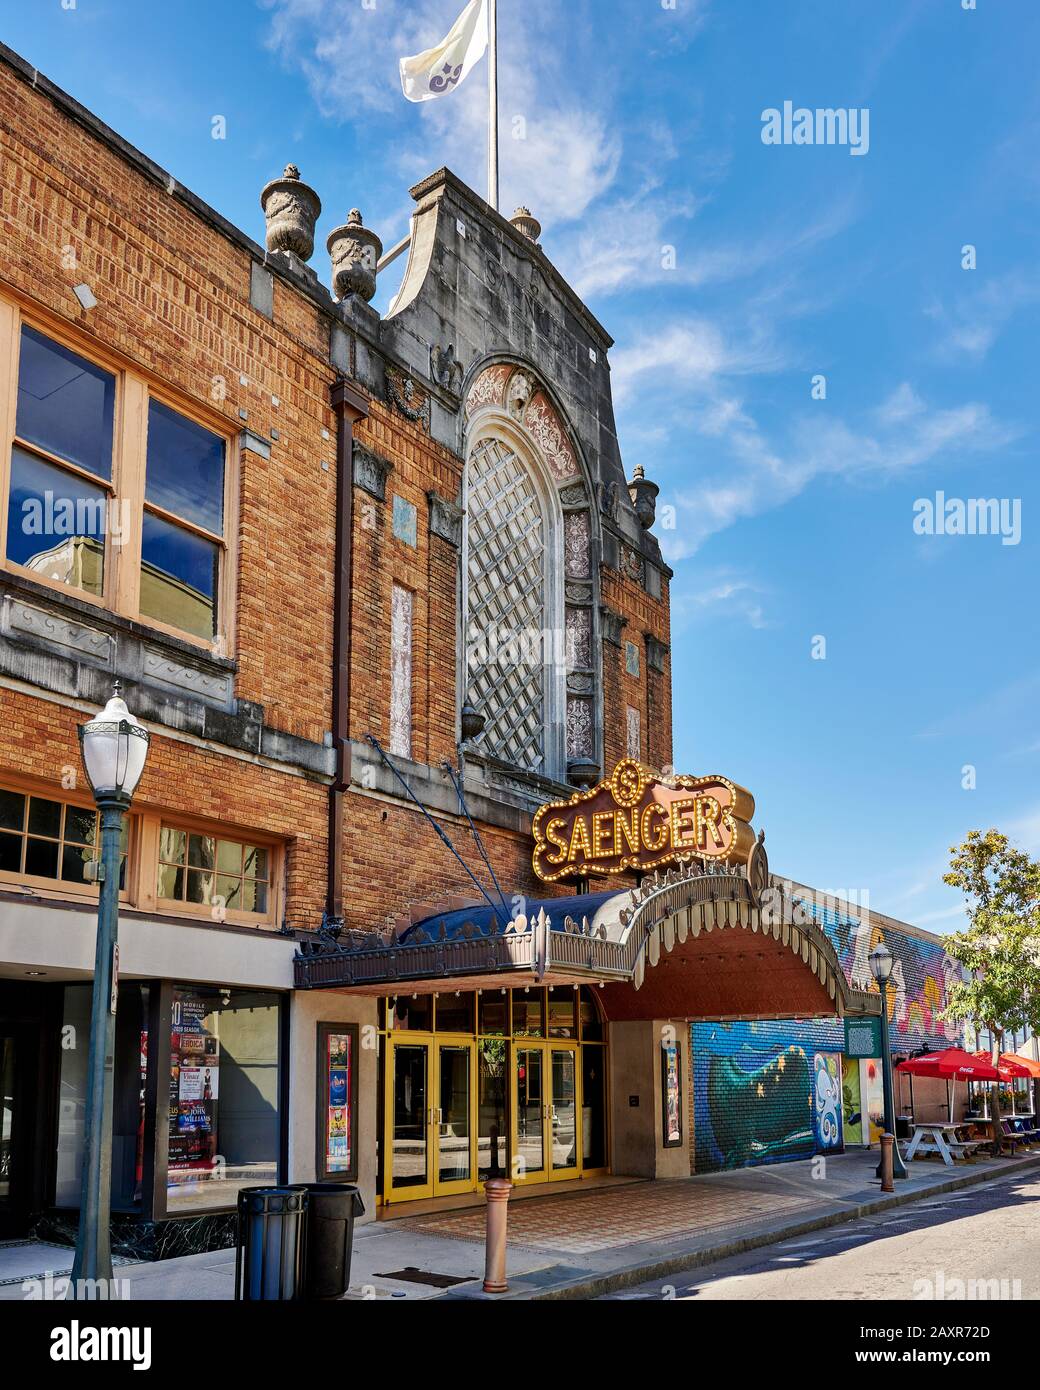 Saenger theater is a vintage cinema and now a restored theater in Mobile Alabama, USA. Stock Photo